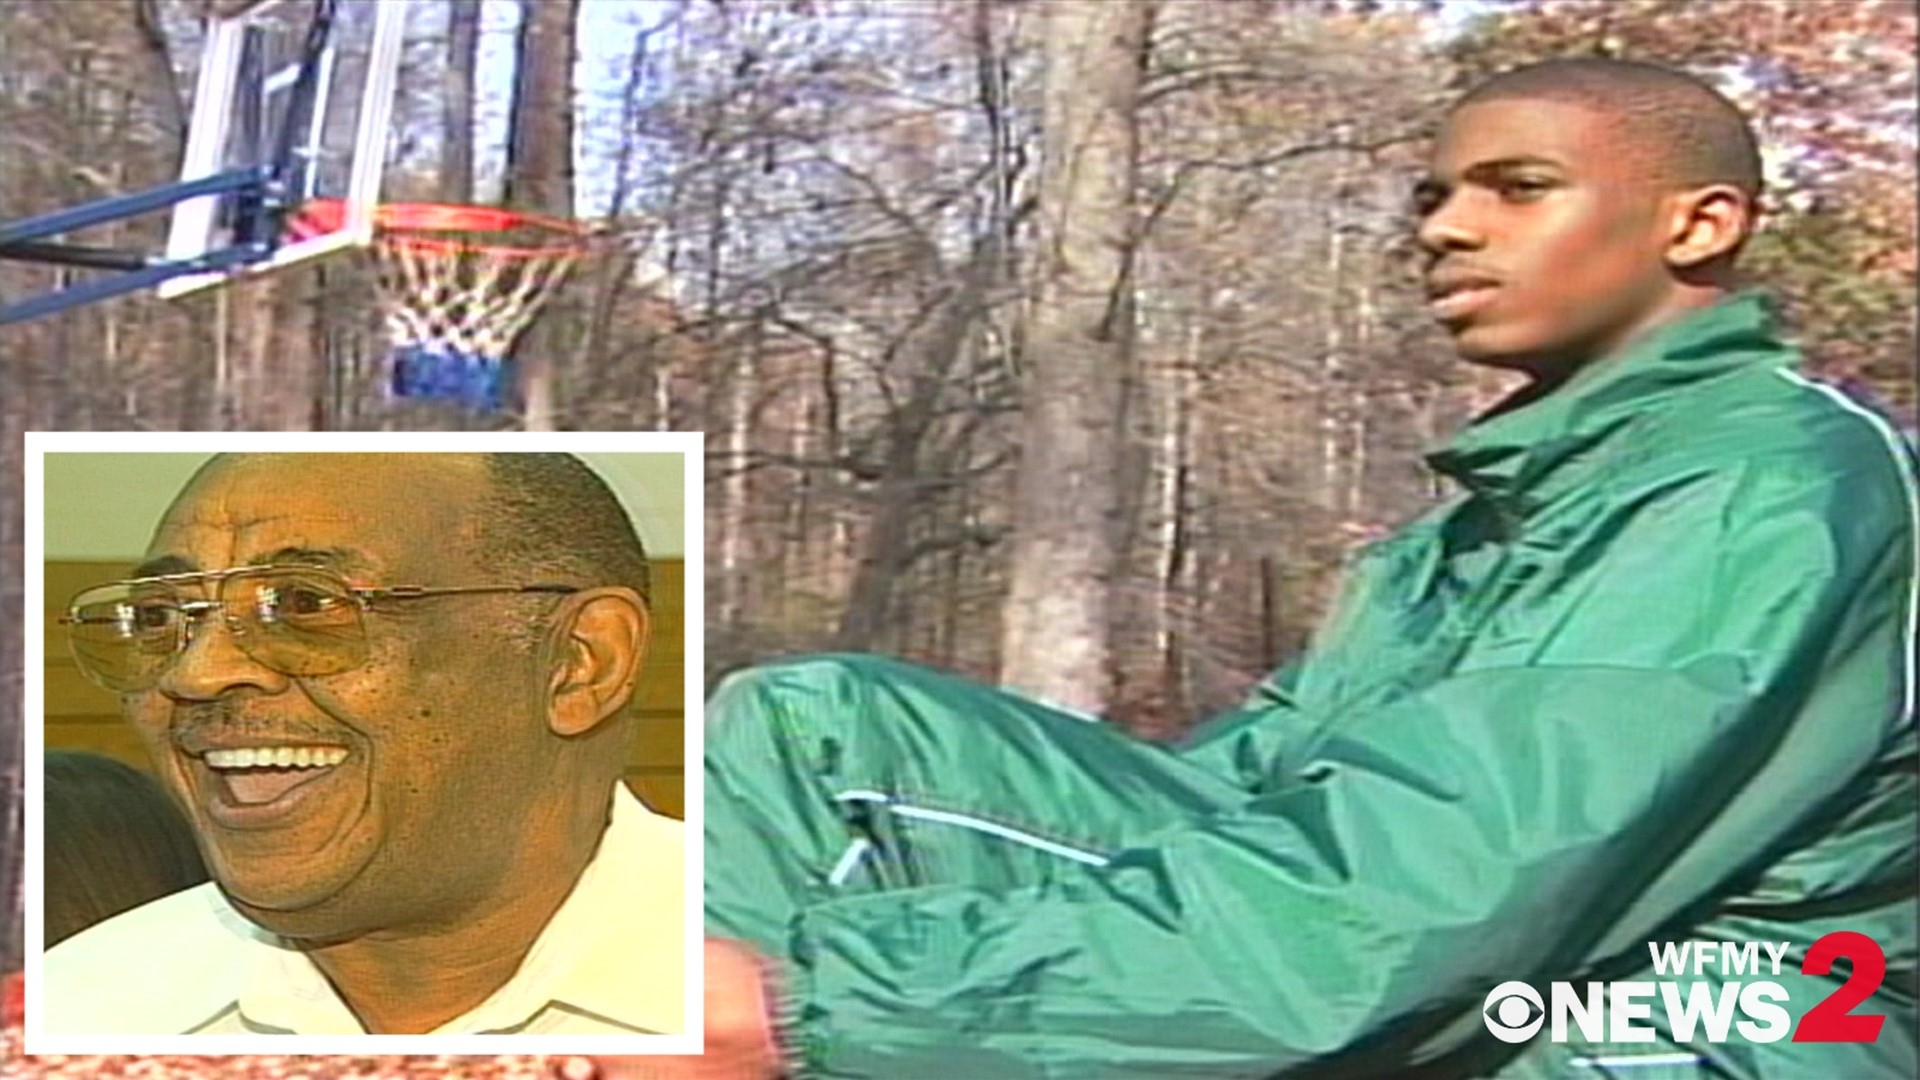 Nathaniel Jones, 61, was beaten to death at his Winston-Salem home in November 2002. He was the grandfather of NBA star Chris Paul.